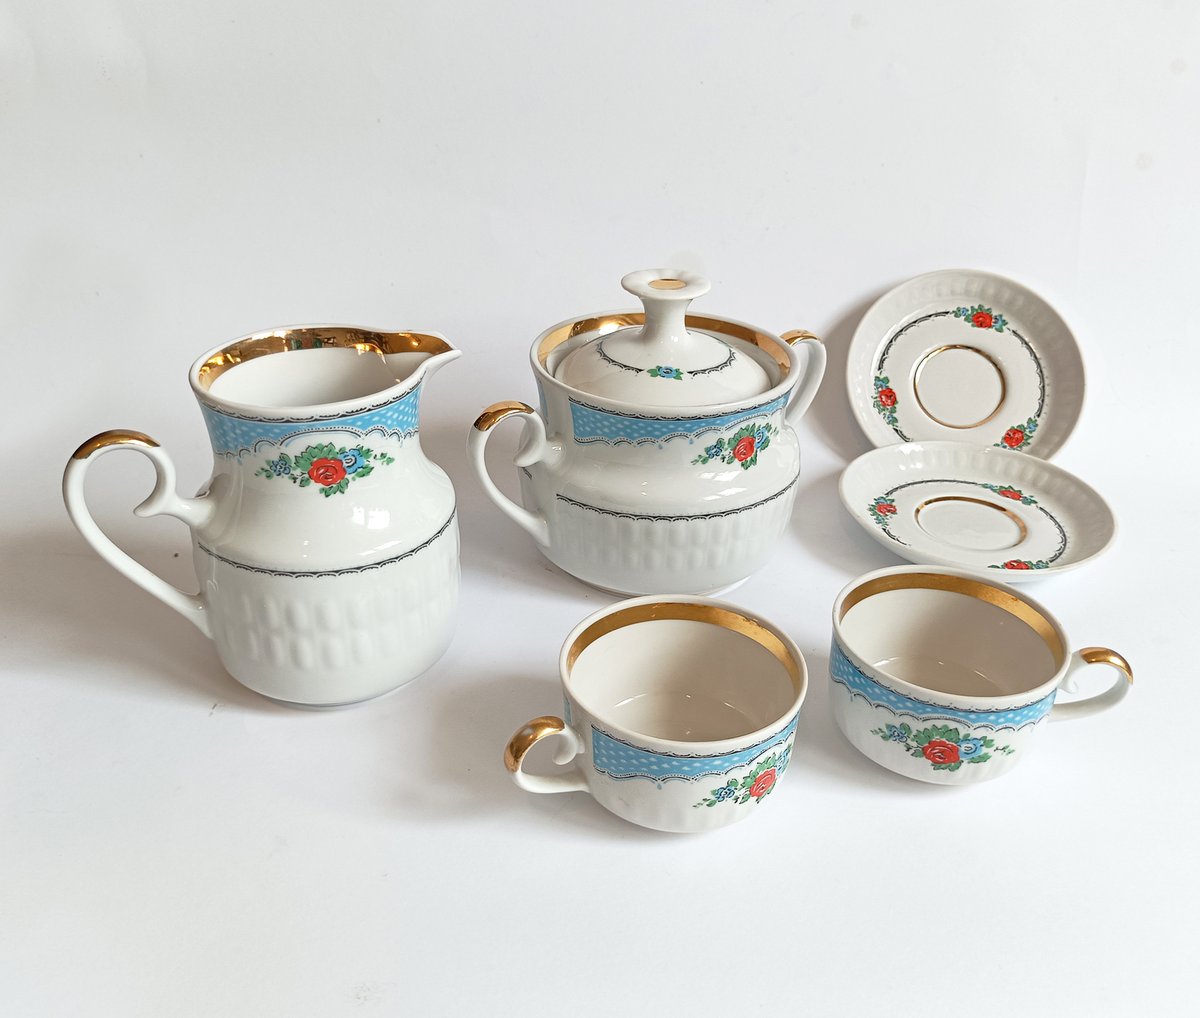 Antique coffee service 70s Red rose White and blue porcelain coffee set with sugar bowl and creamer Vintage espupresso cups Valentine's Day etsy.me/4801zoq через @Etsy